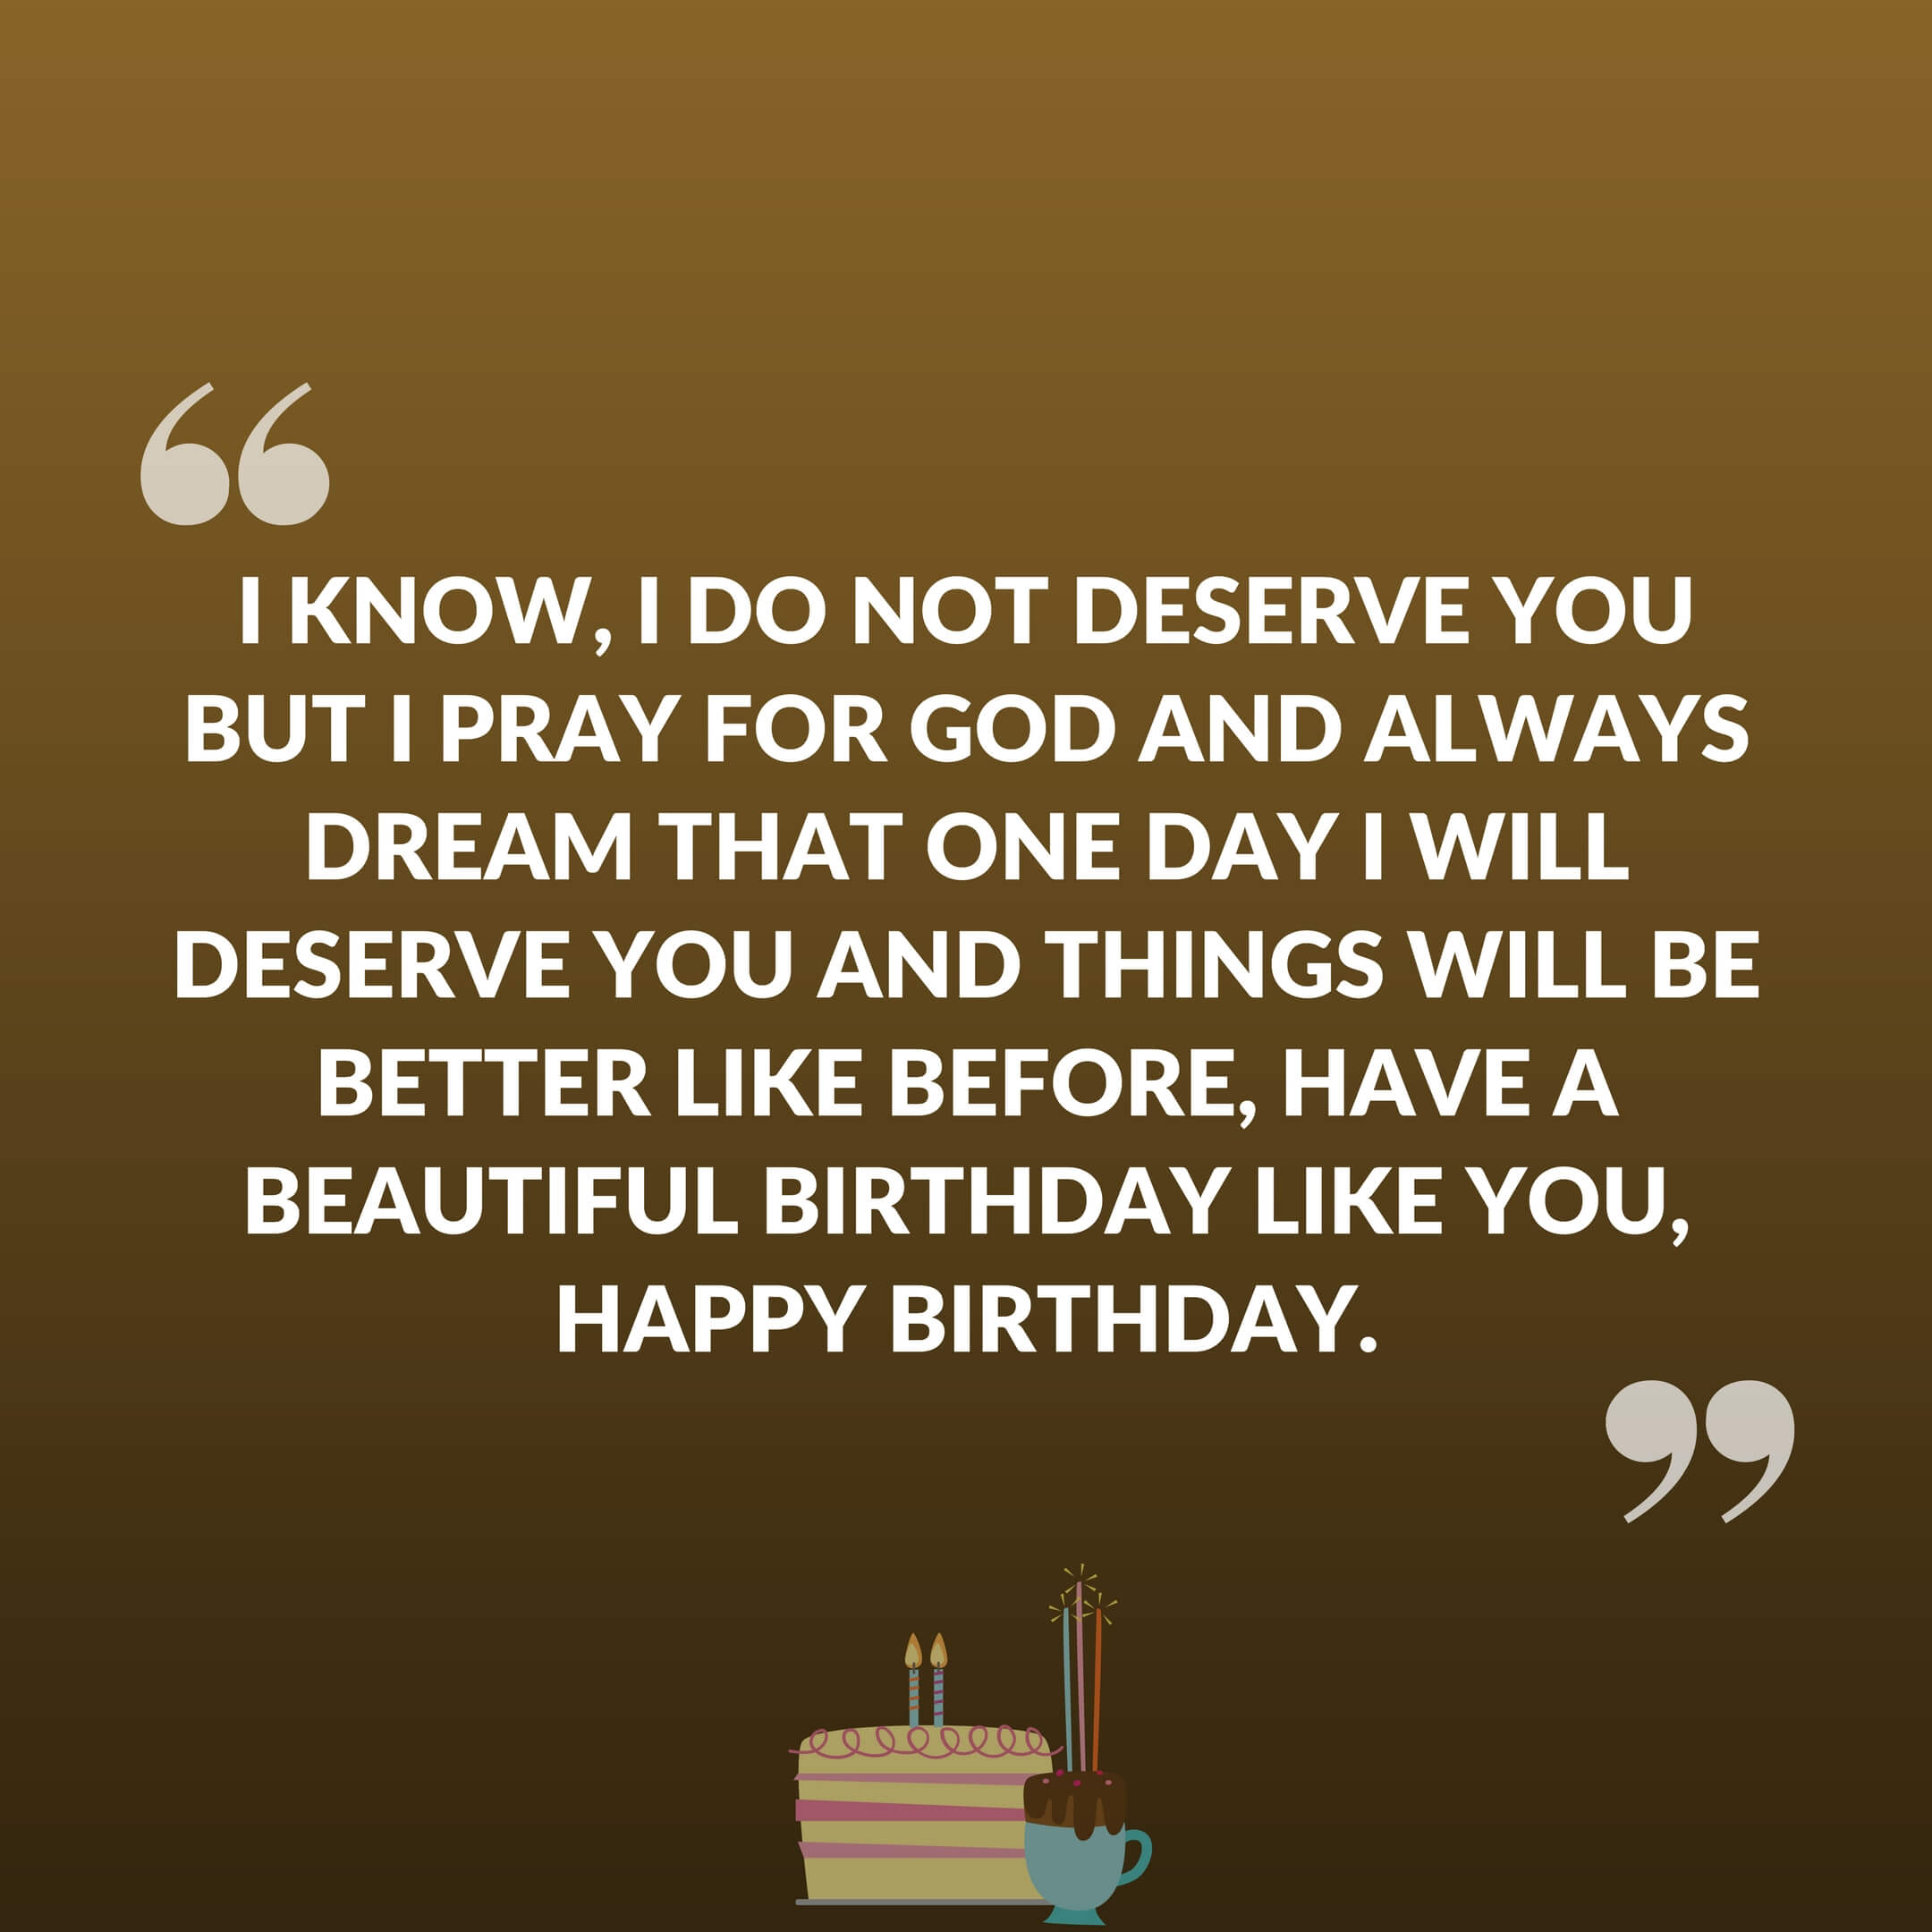 I know, I am not deserve for you but I pray for god and always dream that one day I will deserve you and things will be better like before, Have a beautiful birthday like you, Happy Birthday.